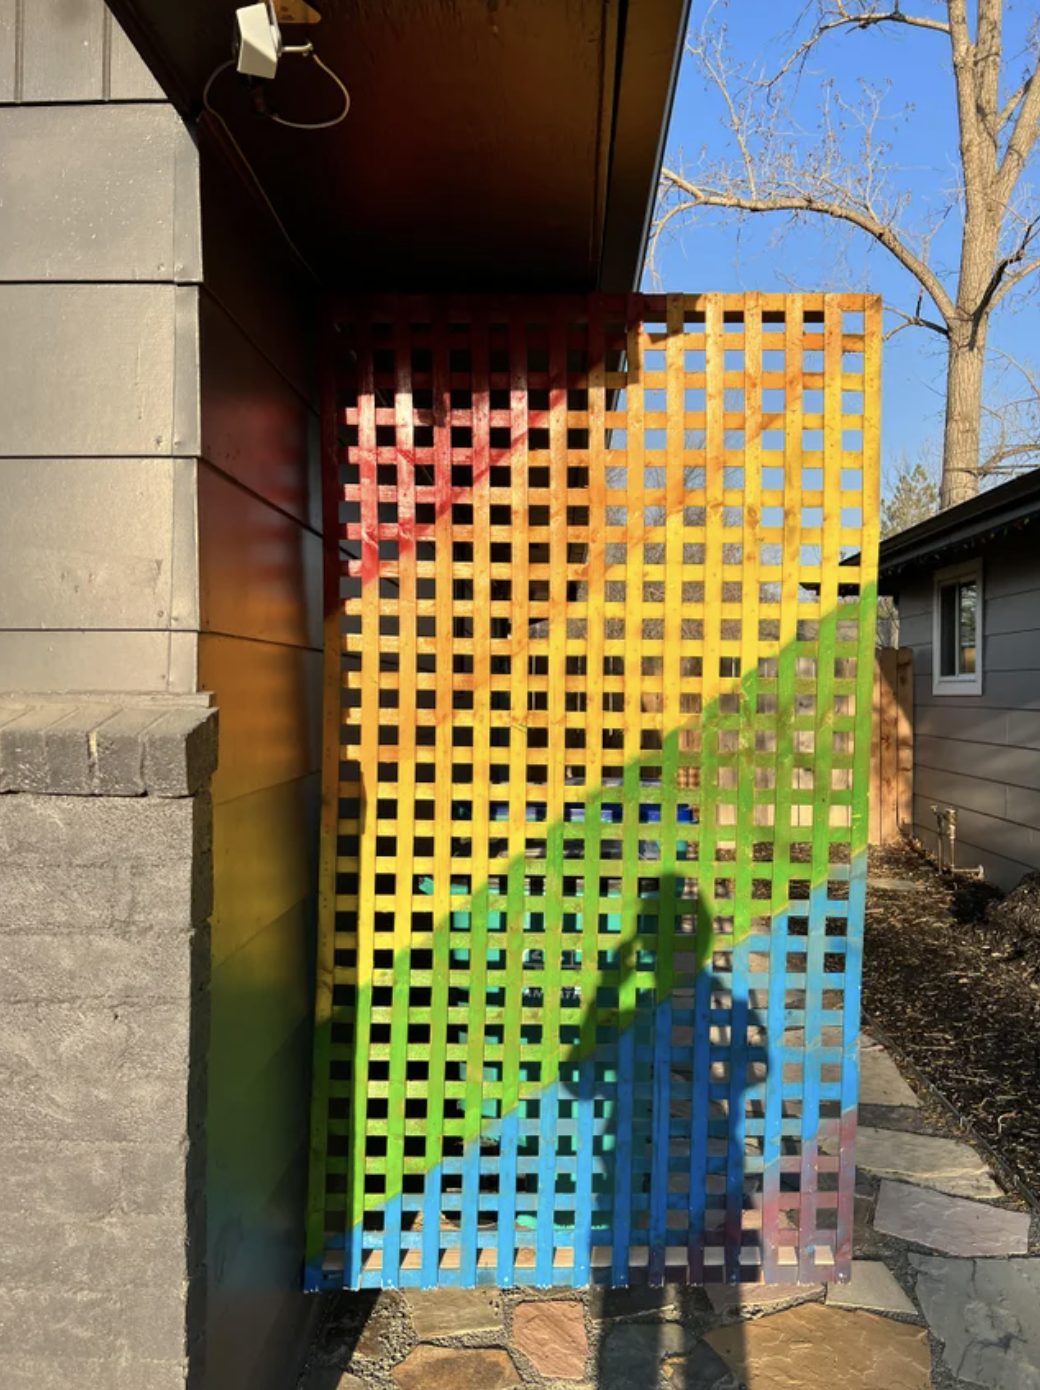 A rainbow-covered lattice on the side of a building.